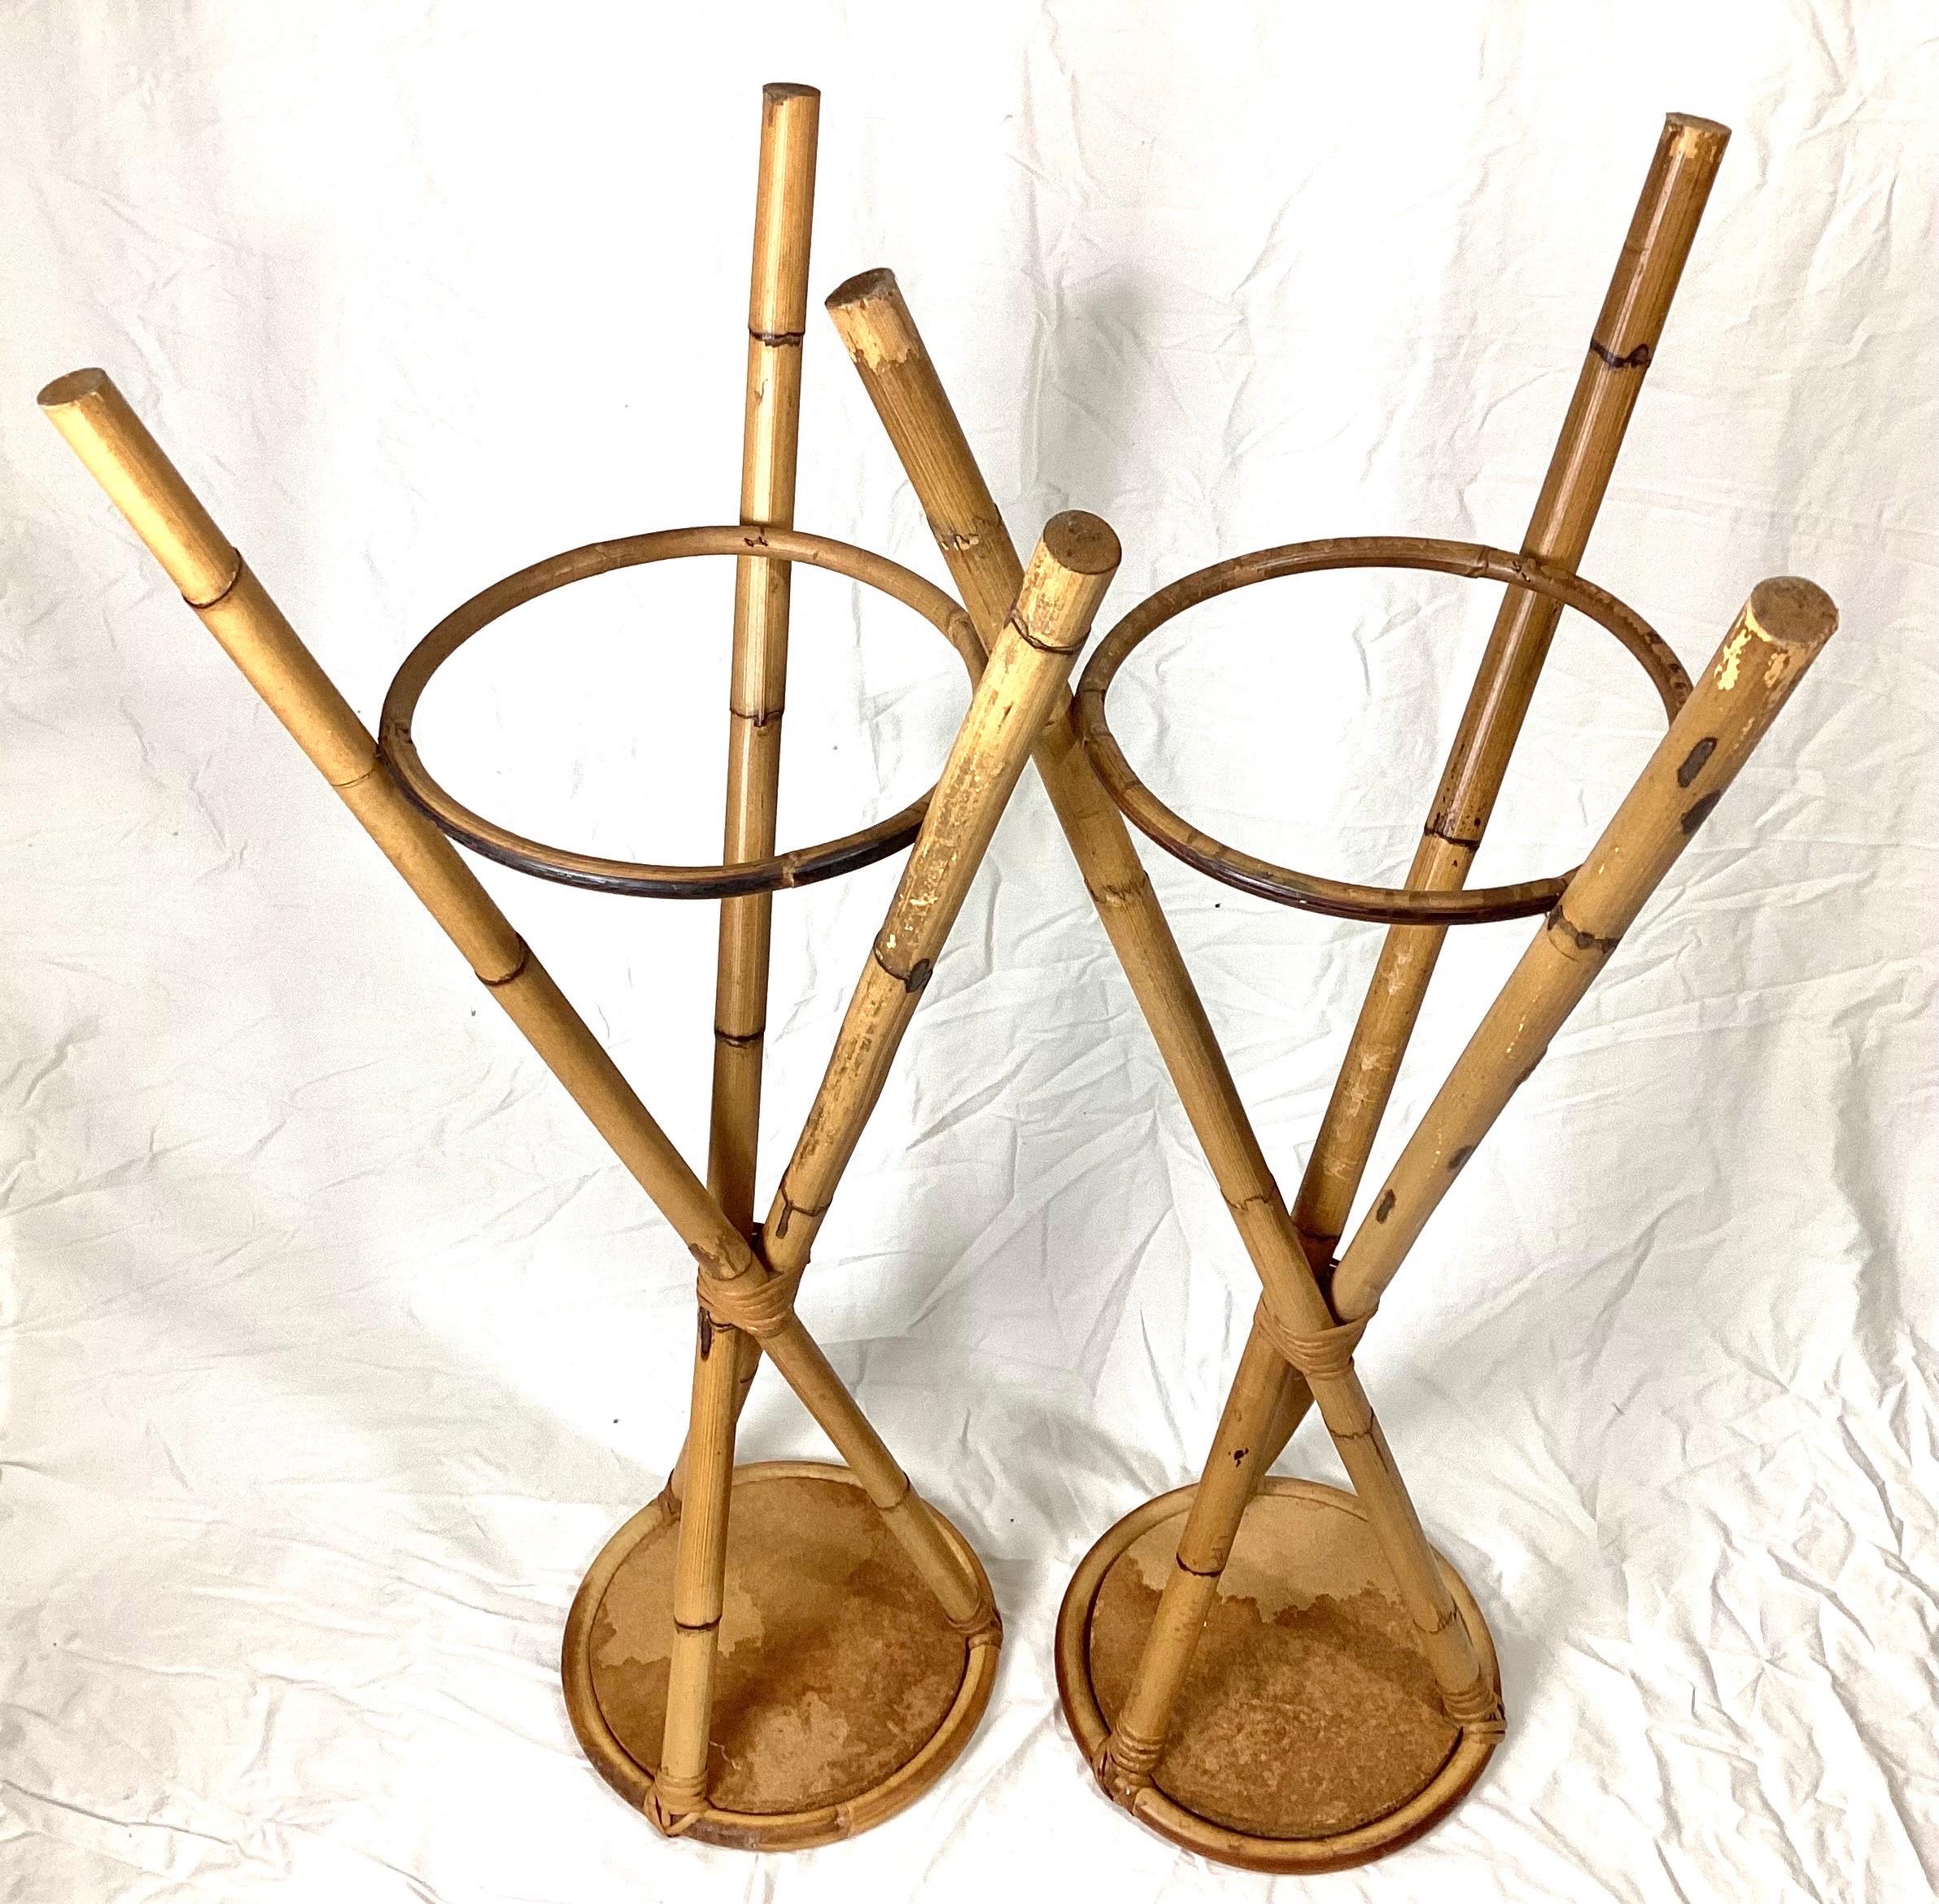 Pair of Rosenthal Netter Bamboo Display Pedestals, Plant Stands, Italy, 1950s For Sale 2